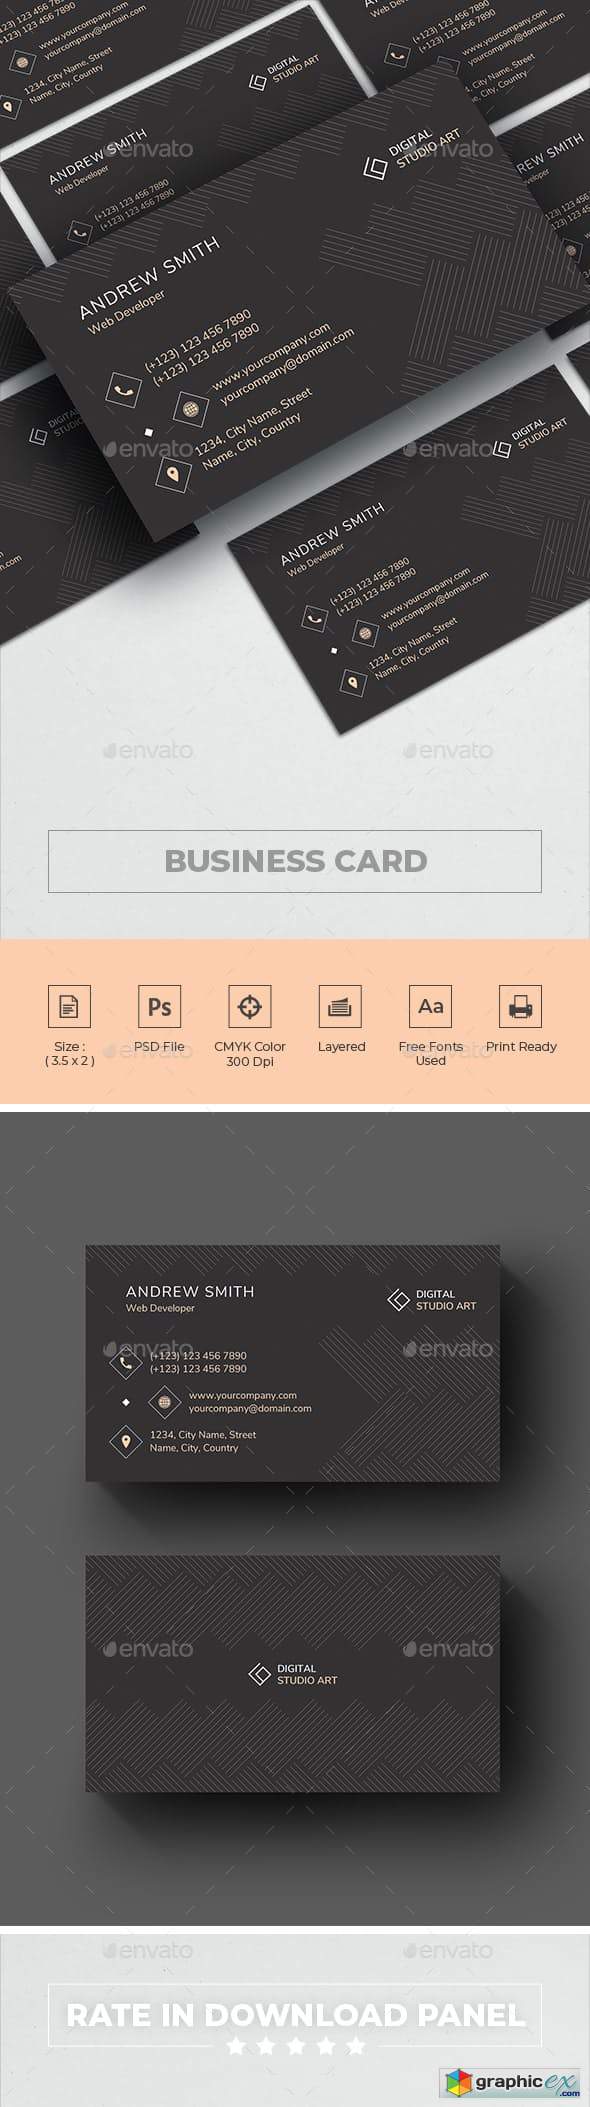 Business Card 23192684